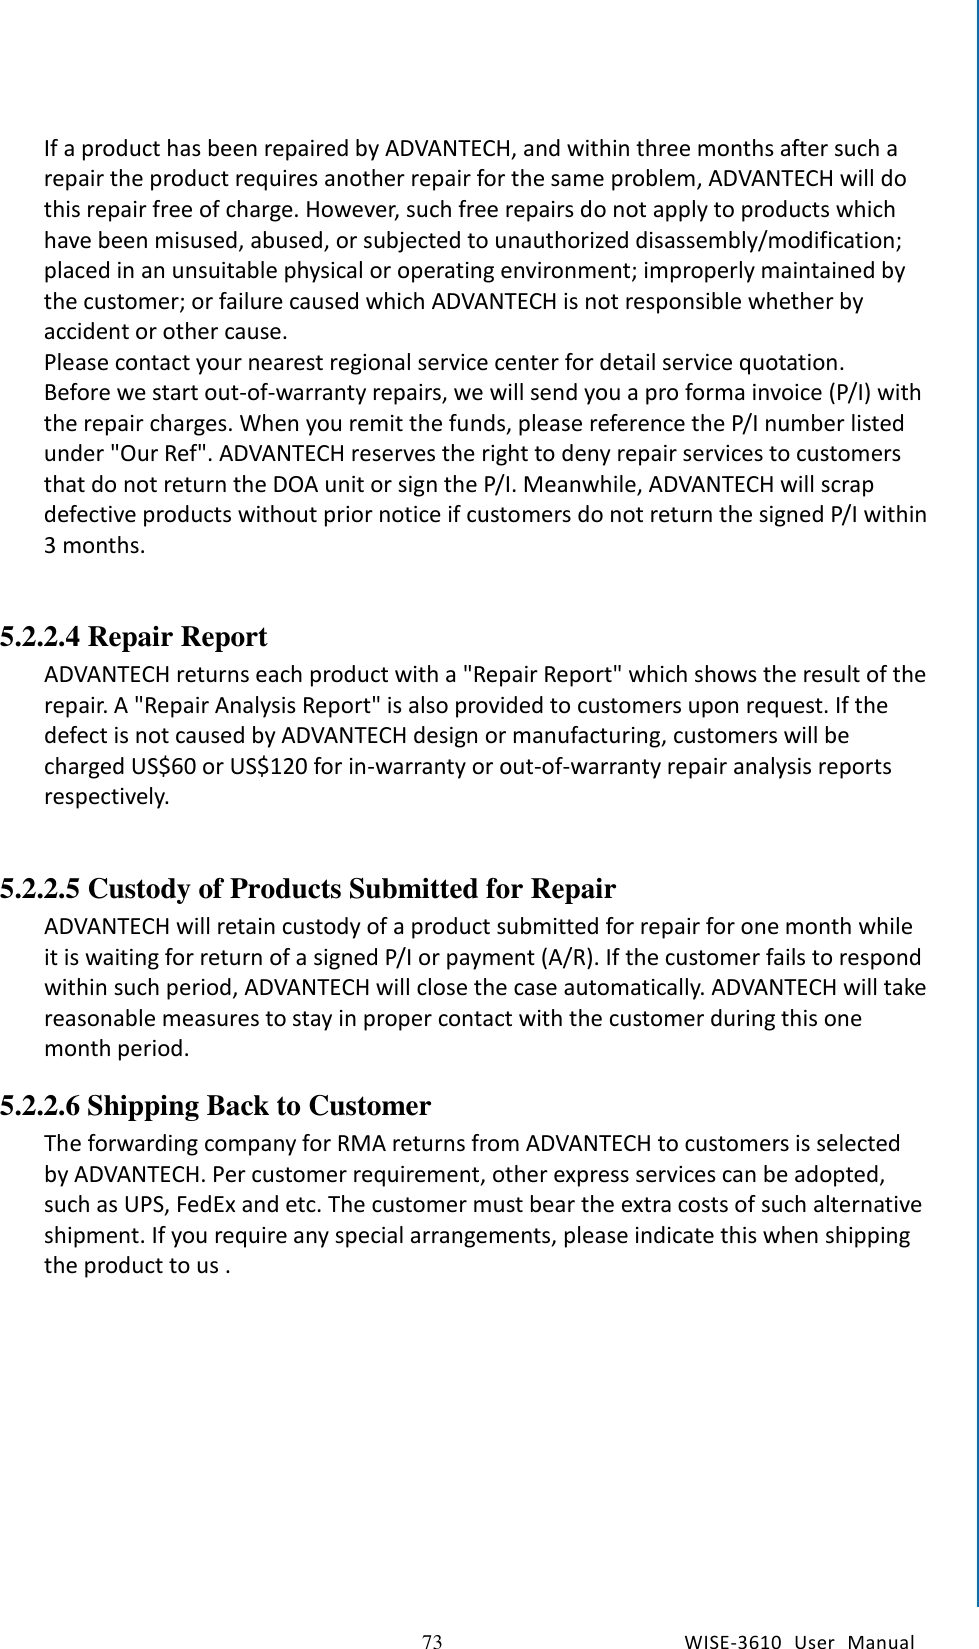   73 WISE-3610  User  Manual  Chapter5    Advantech Services  If a product has been repaired by ADVANTECH, and within three months after such a repair the product requires another repair for the same problem, ADVANTECH will do this repair free of charge. However, such free repairs do not apply to products which have been misused, abused, or subjected to unauthorized disassembly/modification; placed in an unsuitable physical or operating environment; improperly maintained by the customer; or failure caused which ADVANTECH is not responsible whether by accident or other cause. Please contact your nearest regional service center for detail service quotation.   Before we start out-of-warranty repairs, we will send you a pro forma invoice (P/I) with the repair charges. When you remit the funds, please reference the P/I number listed under &quot;Our Ref&quot;. ADVANTECH reserves the right to deny repair services to customers that do not return the DOA unit or sign the P/I. Meanwhile, ADVANTECH will scrap defective products without prior notice if customers do not return the signed P/I within 3 months.        5.2.2.4 Repair Report ADVANTECH returns each product with a &quot;Repair Report&quot; which shows the result of the repair. A &quot;Repair Analysis Report&quot; is also provided to customers upon request. If the defect is not caused by ADVANTECH design or manufacturing, customers will be charged US$60 or US$120 for in-warranty or out-of-warranty repair analysis reports respectively.        5.2.2.5 Custody of Products Submitted for Repair ADVANTECH will retain custody of a product submitted for repair for one month while it is waiting for return of a signed P/I or payment (A/R). If the customer fails to respond within such period, ADVANTECH will close the case automatically. ADVANTECH will take reasonable measures to stay in proper contact with the customer during this one month period. 5.2.2.6 Shipping Back to Customer The forwarding company for RMA returns from ADVANTECH to customers is selected by ADVANTECH. Per customer requirement, other express services can be adopted, such as UPS, FedEx and etc. The customer must bear the extra costs of such alternative shipment. If you require any special arrangements, please indicate this when shipping the product to us .